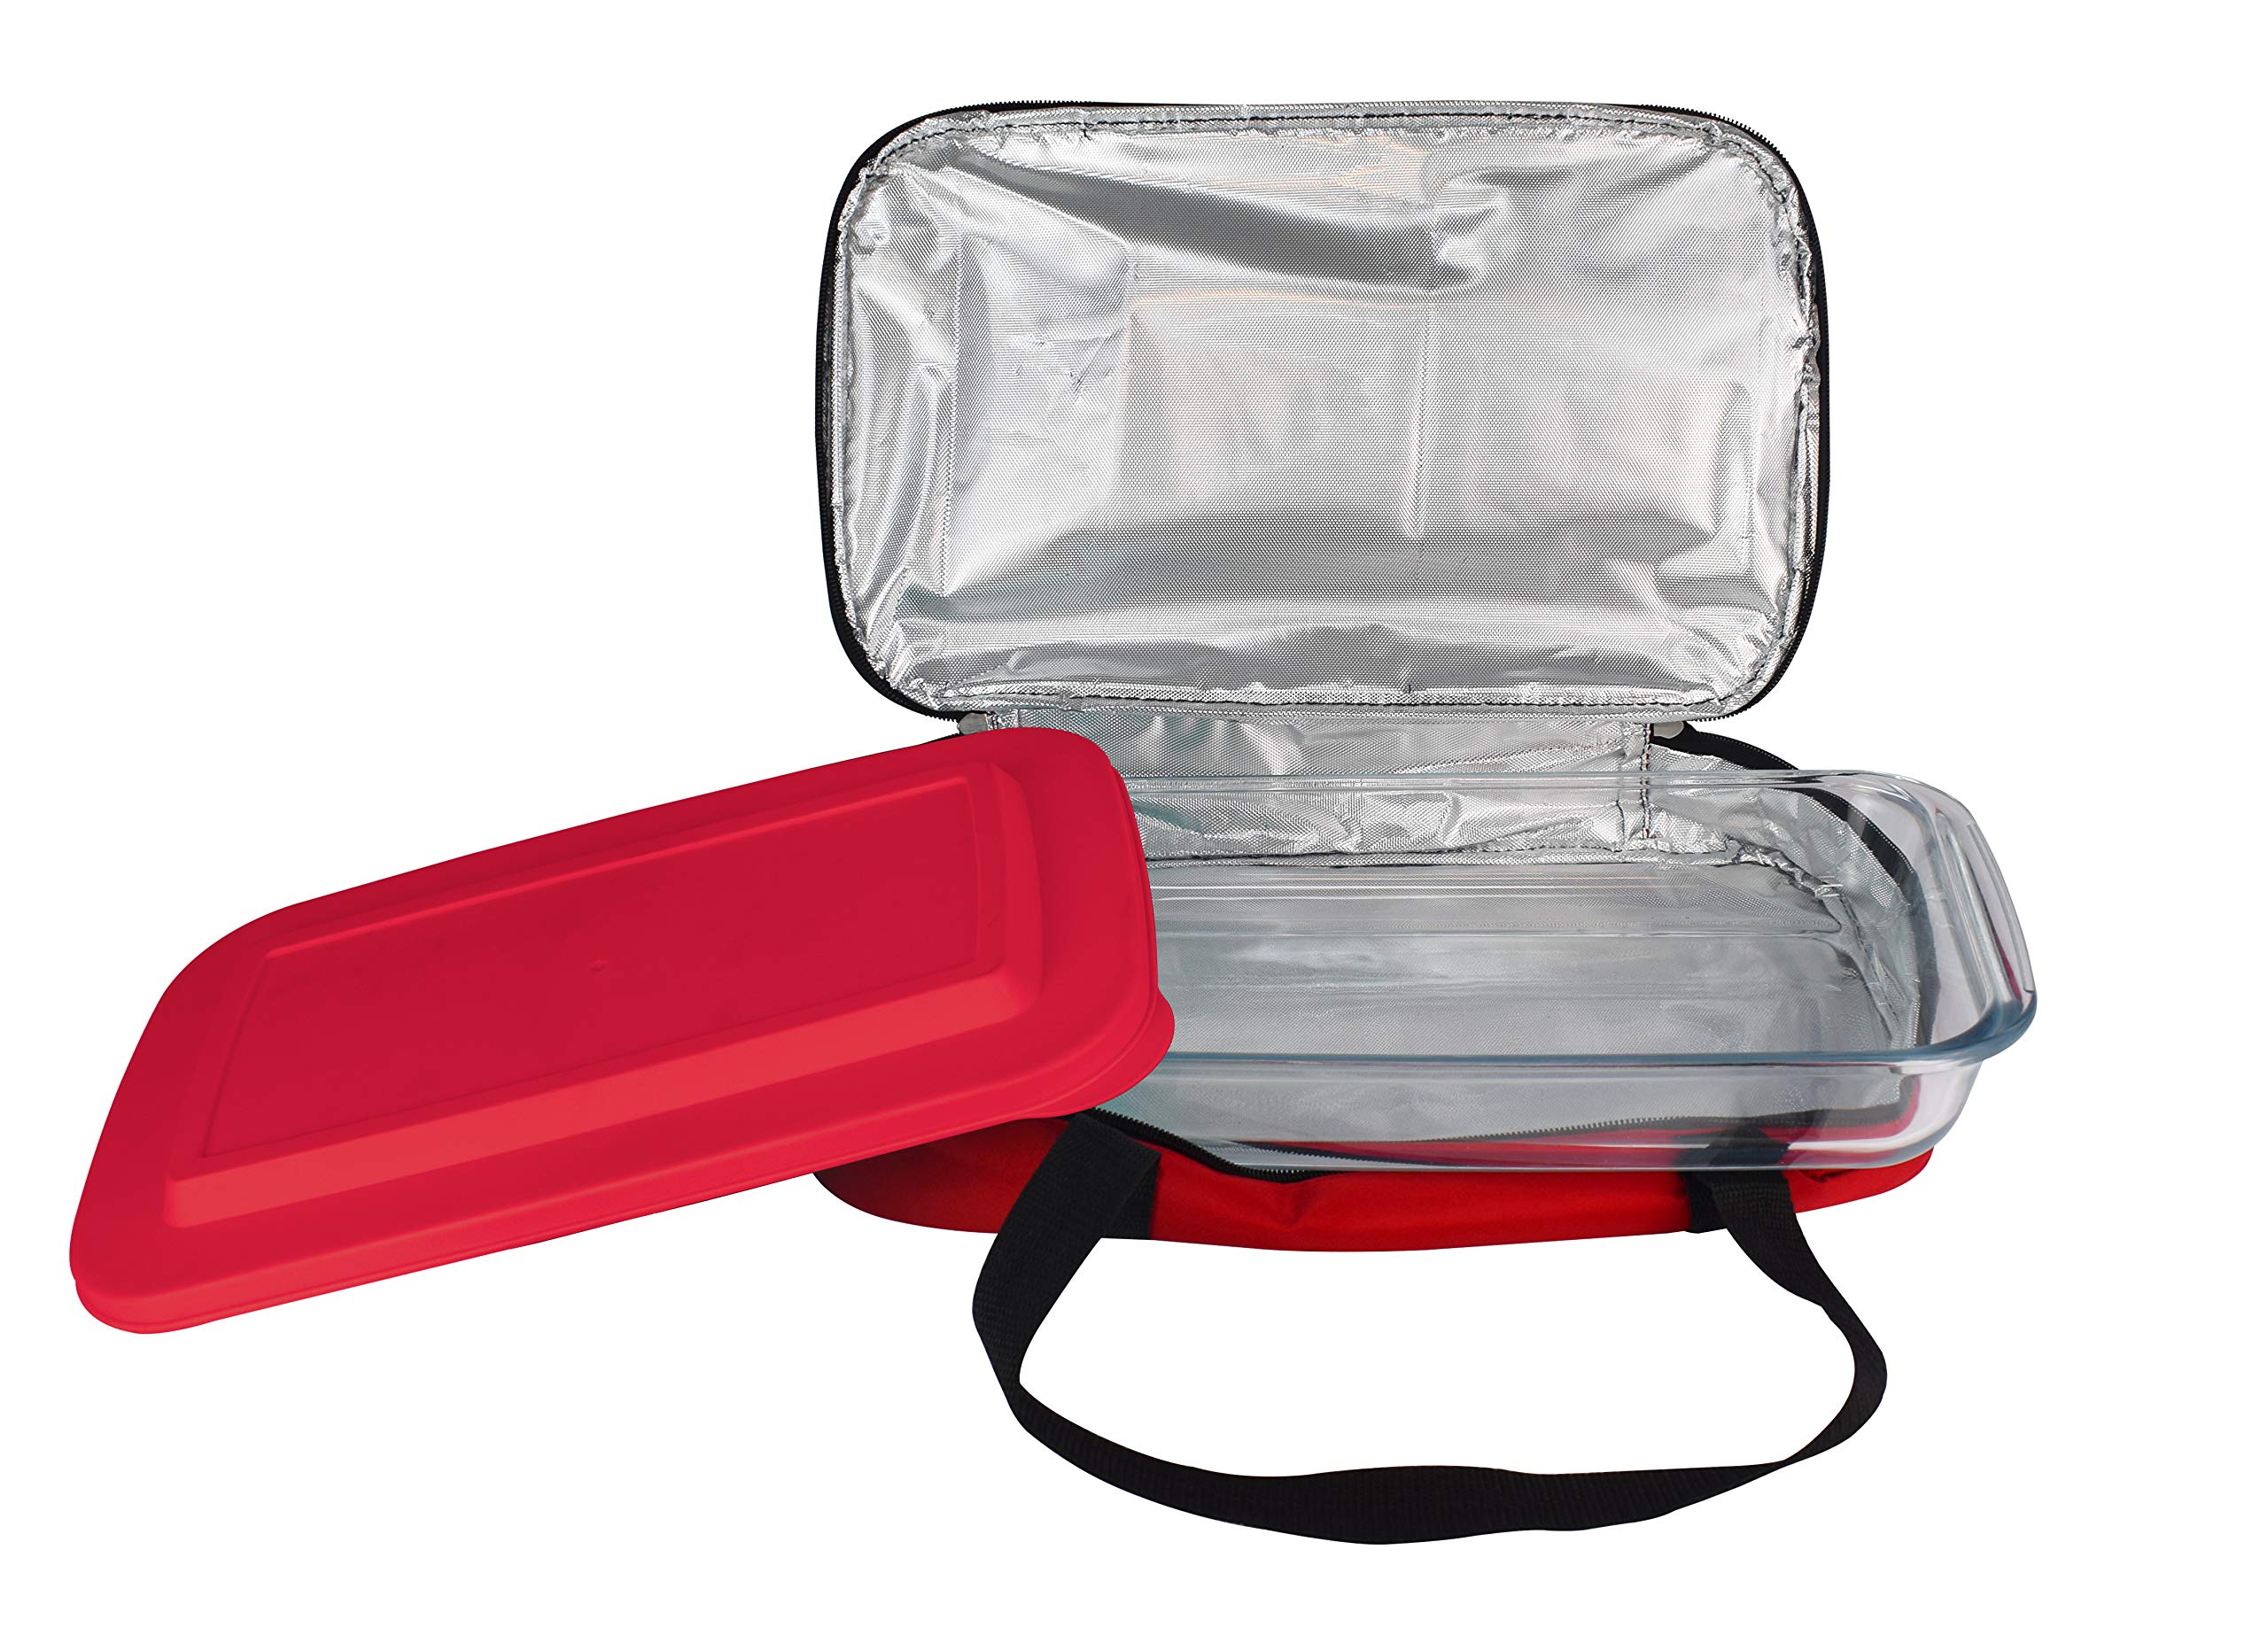 Le Regalo HW1236 Glass Casserole with Insulated Bag, Ideal for Picnic, Potluck, Hiking & Beach Trip-Retains Hot and Cold Temperature of Food, 14